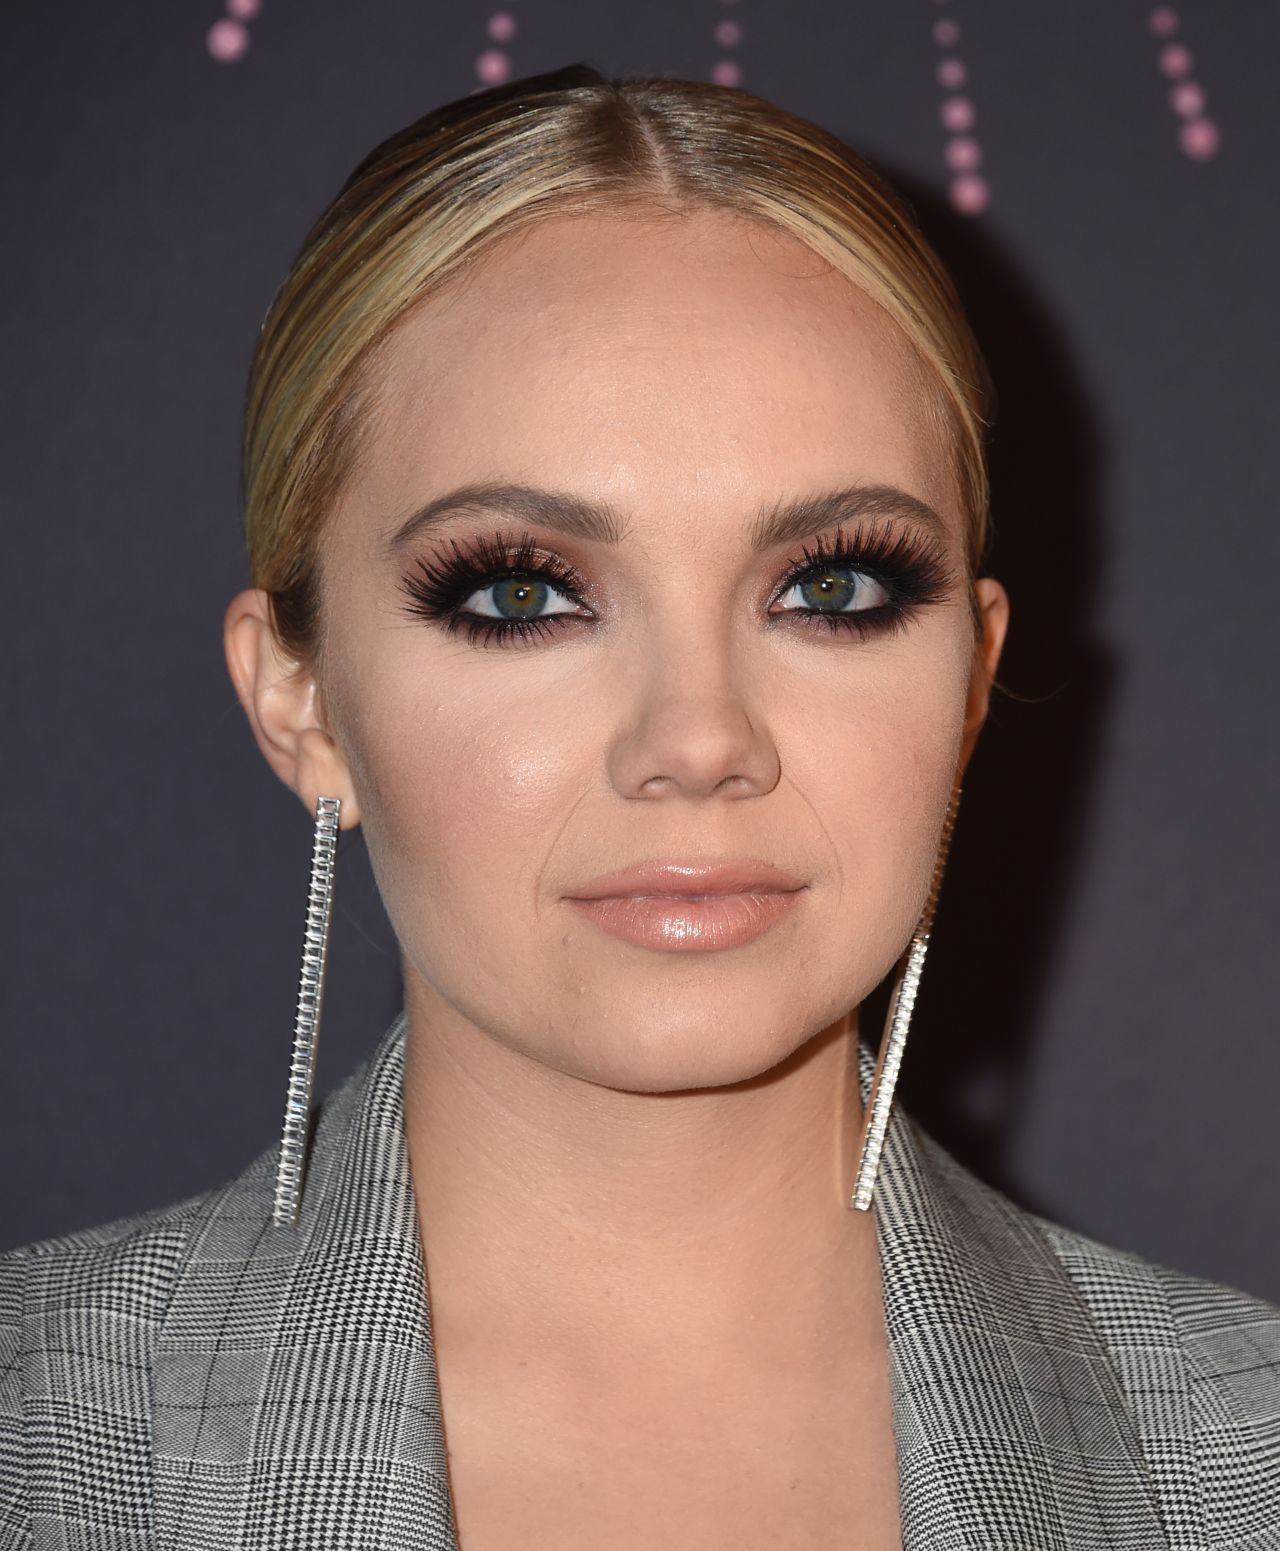 Danielle Bradbery - 2018 CMT Artists of the Year in Nashville.